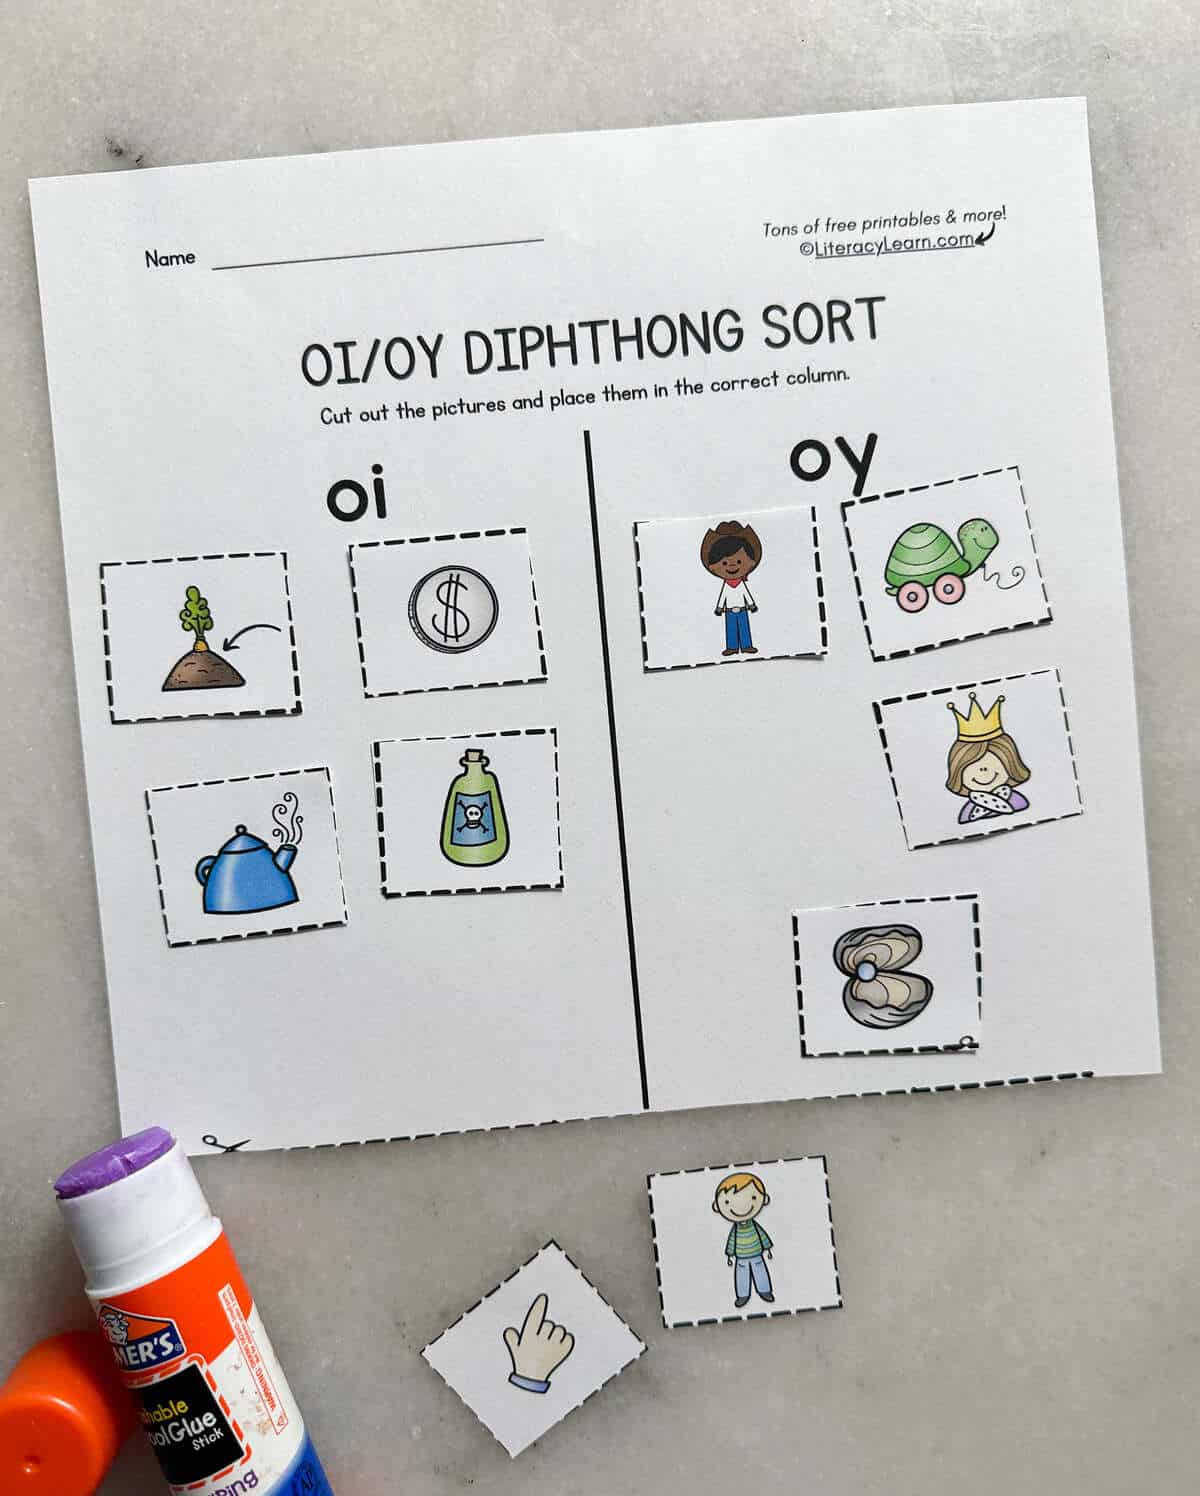 The printed and completed oi/oy picture sort worksheet with a glue stick.